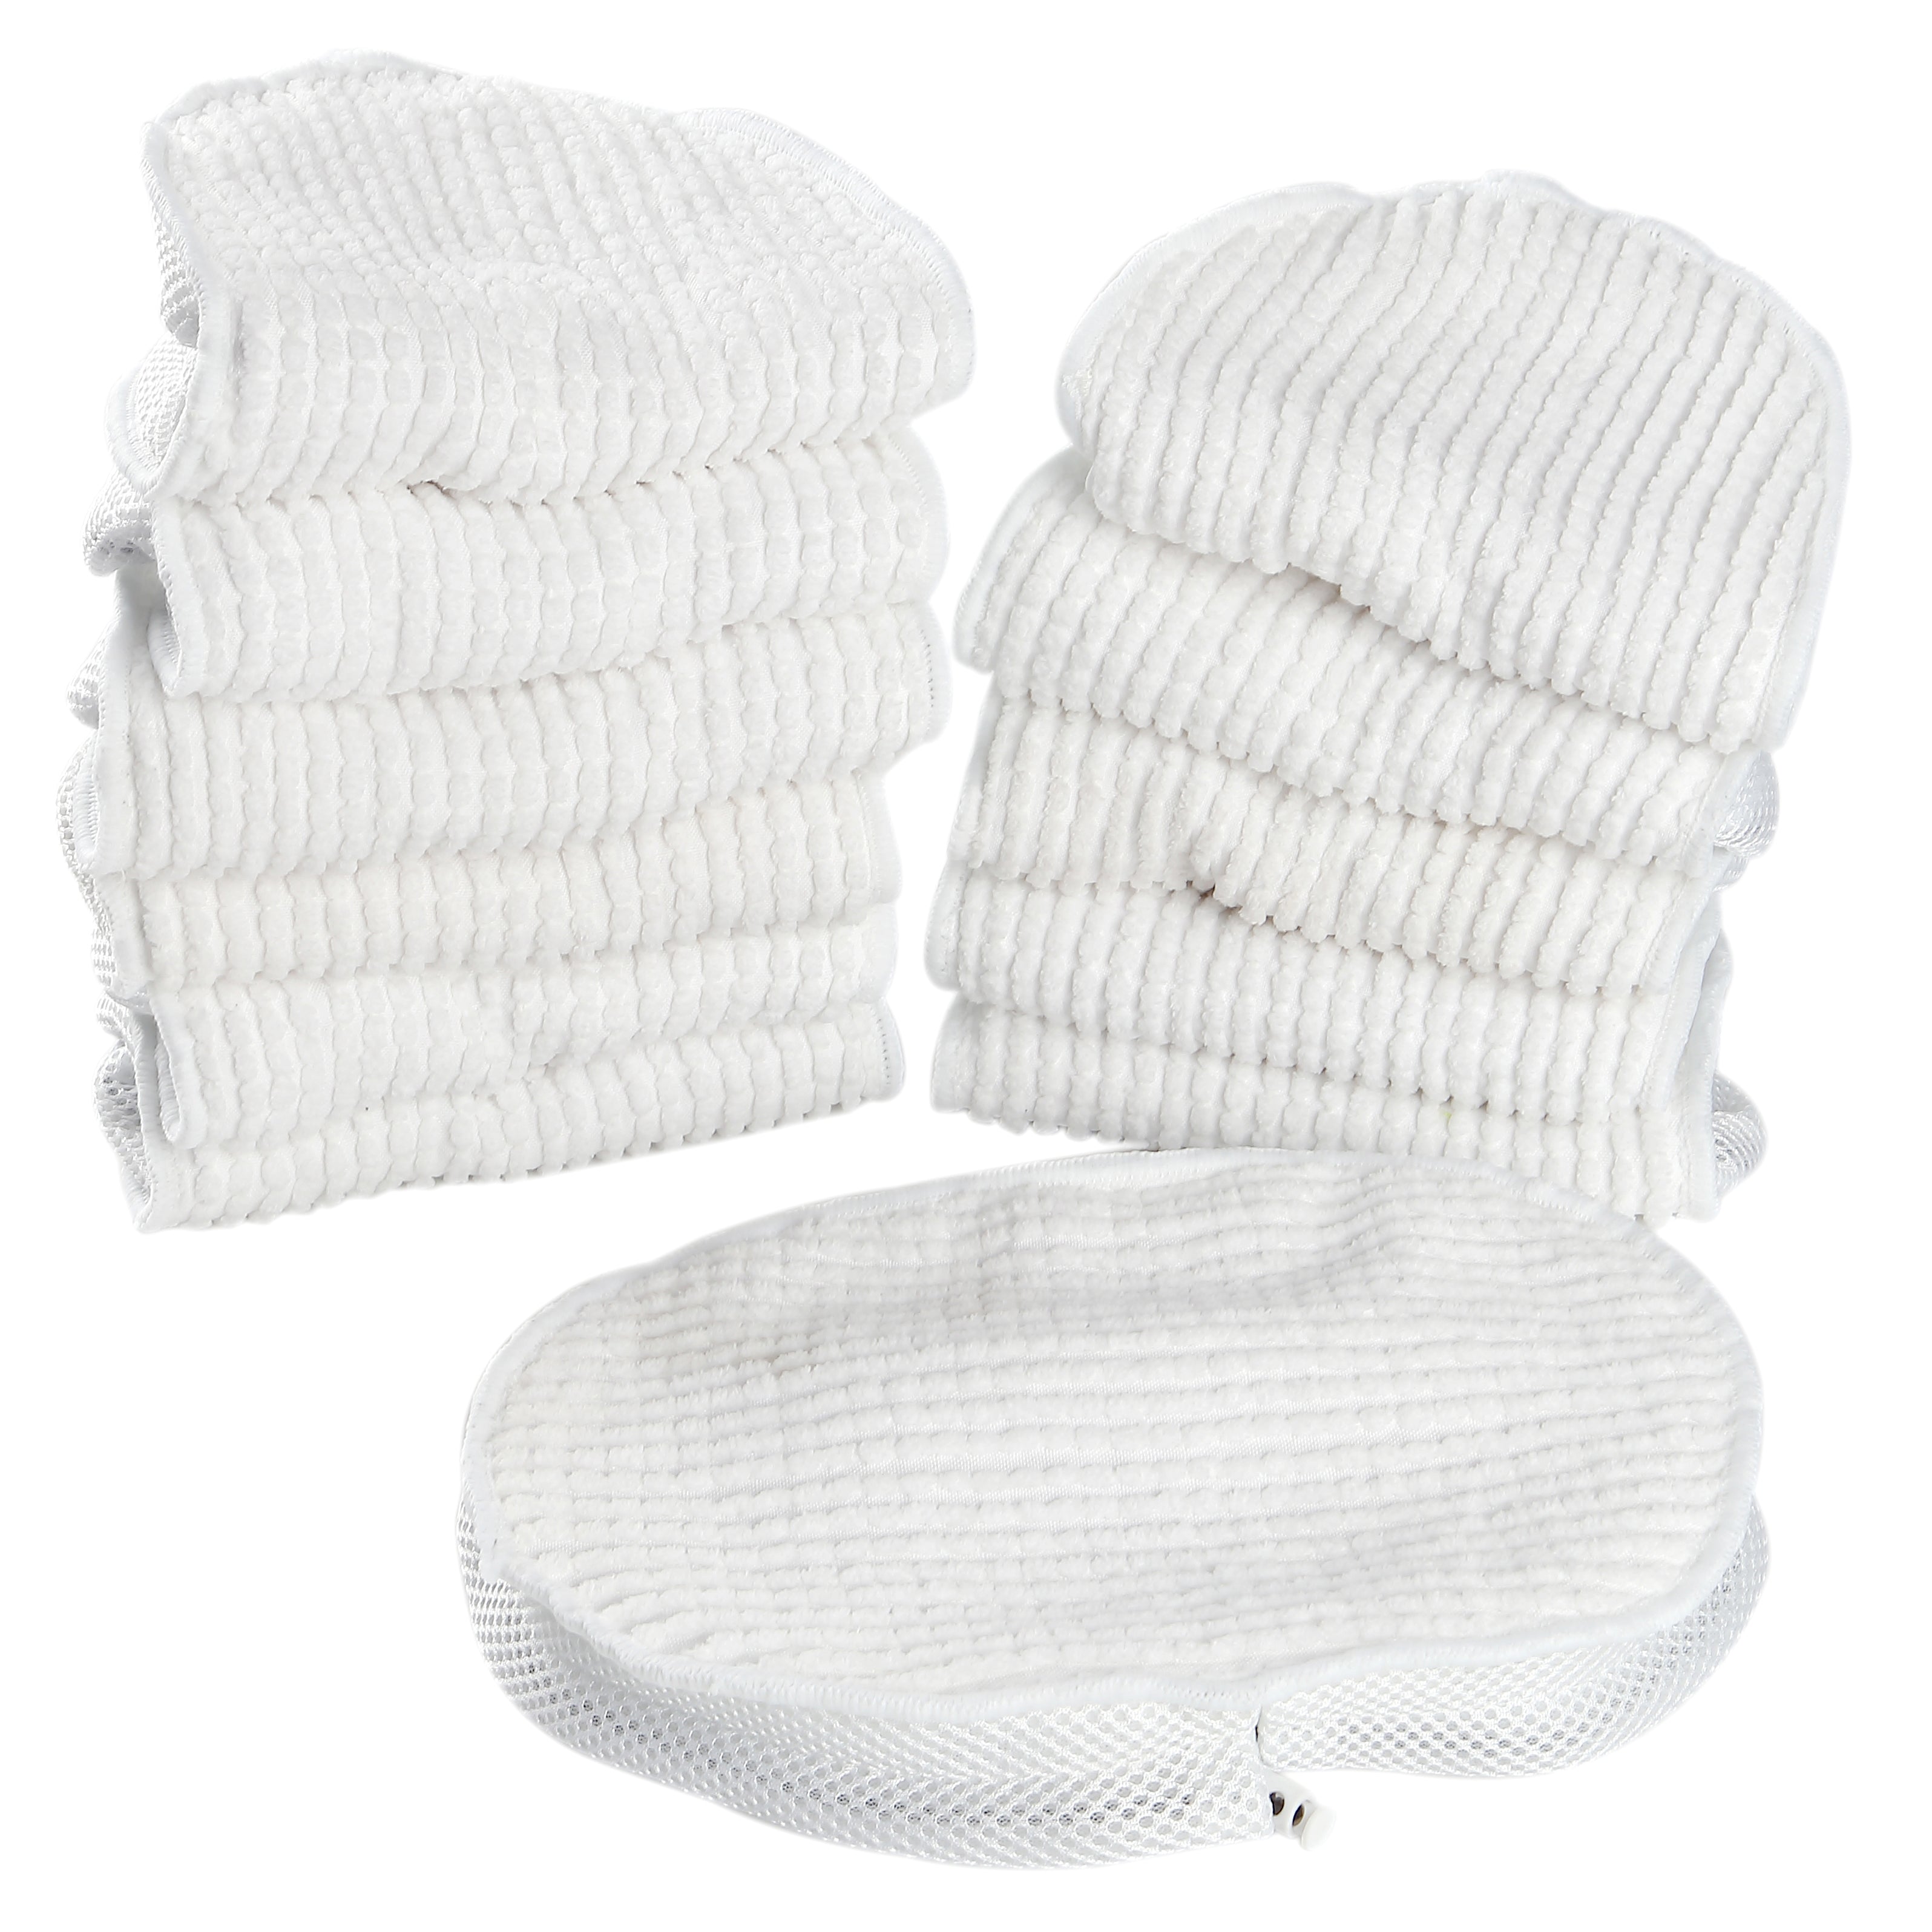 LTWHOME Replacement Coral Mop Pads Fit for Bissell Steam Mop 1867 Compare to Part # 203-2158, 2032158, 3255, 32525(Pack of 12)